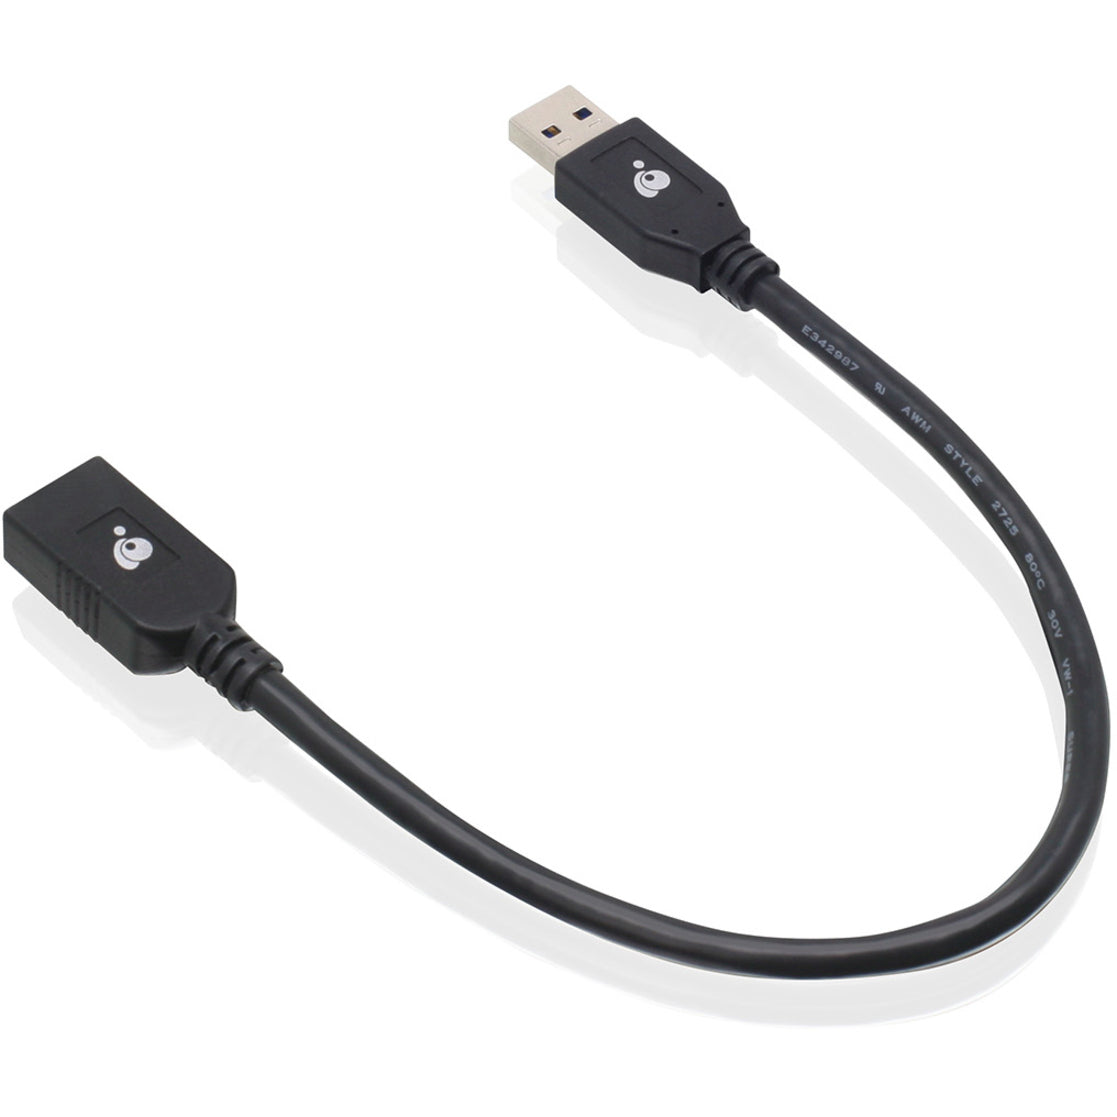 IOGEAR G2LU3AMF USB 3.0 Extension Cable Male to Female 12 Inch, Data Transfer Rate of 5 Gbit/s